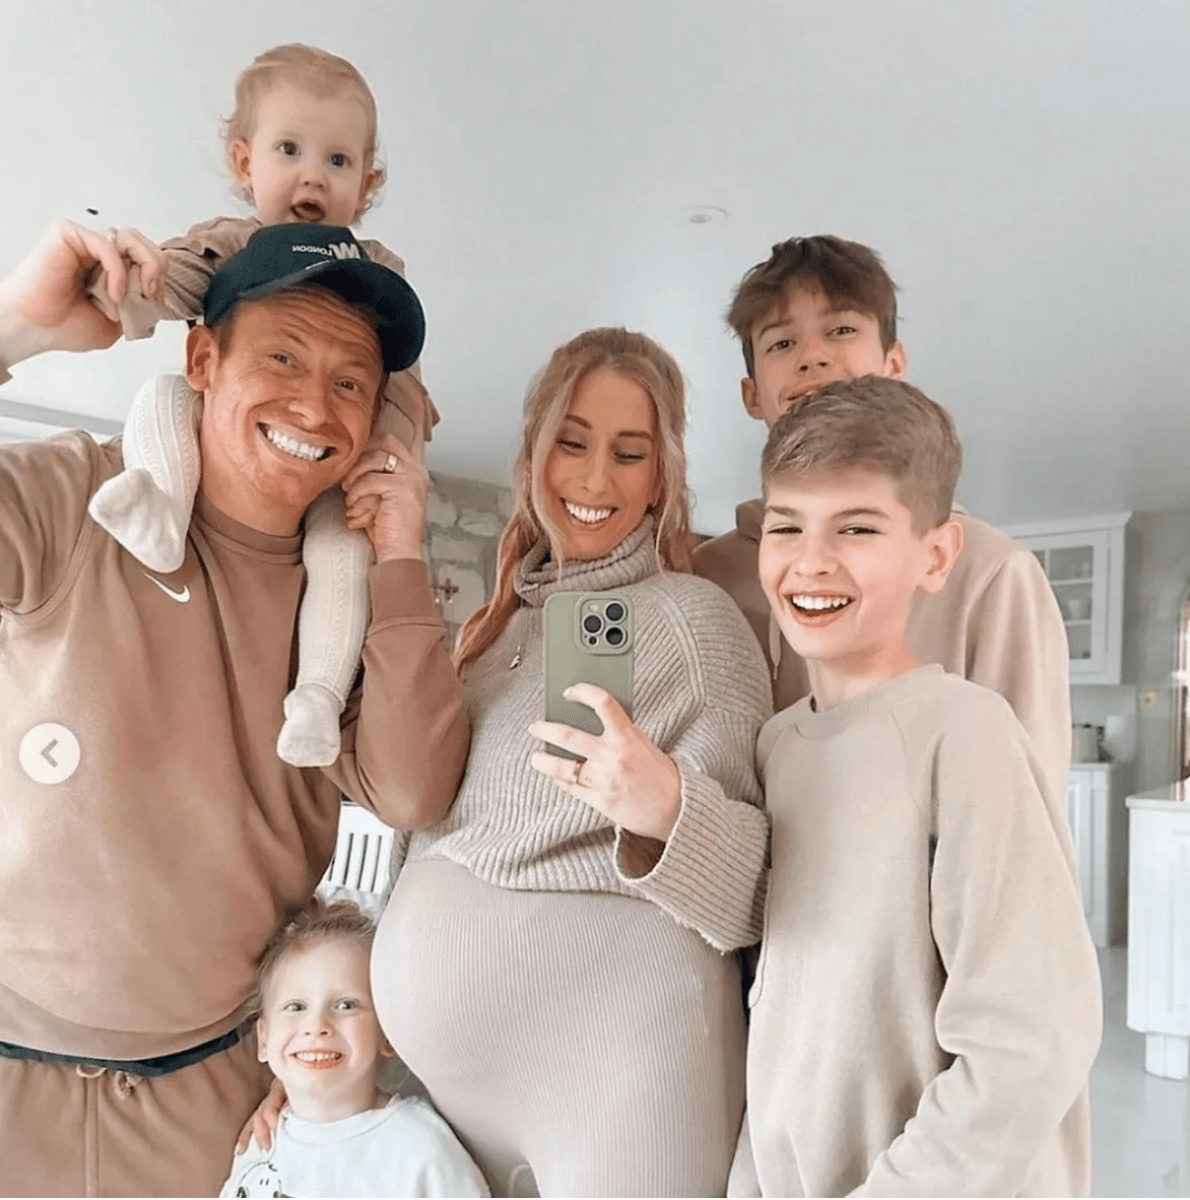 Stacey Solomon and Husband Joe Swash Tipped To Star In Their Own Show Like The Kardashians